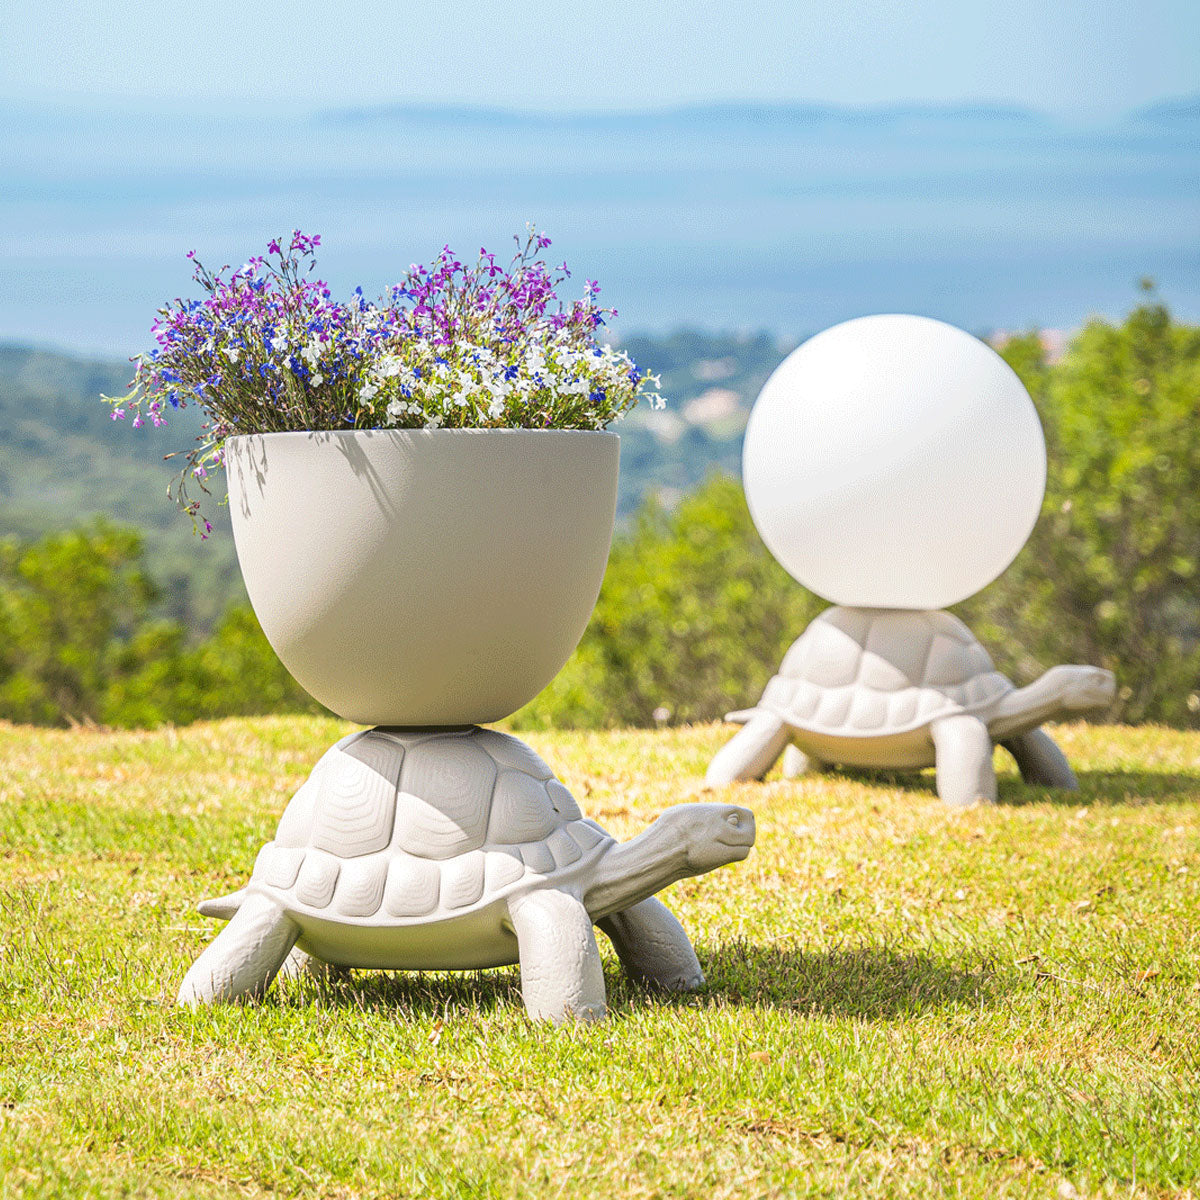 Turtle Carry Planter/Champagne Cooler - Qeeboo